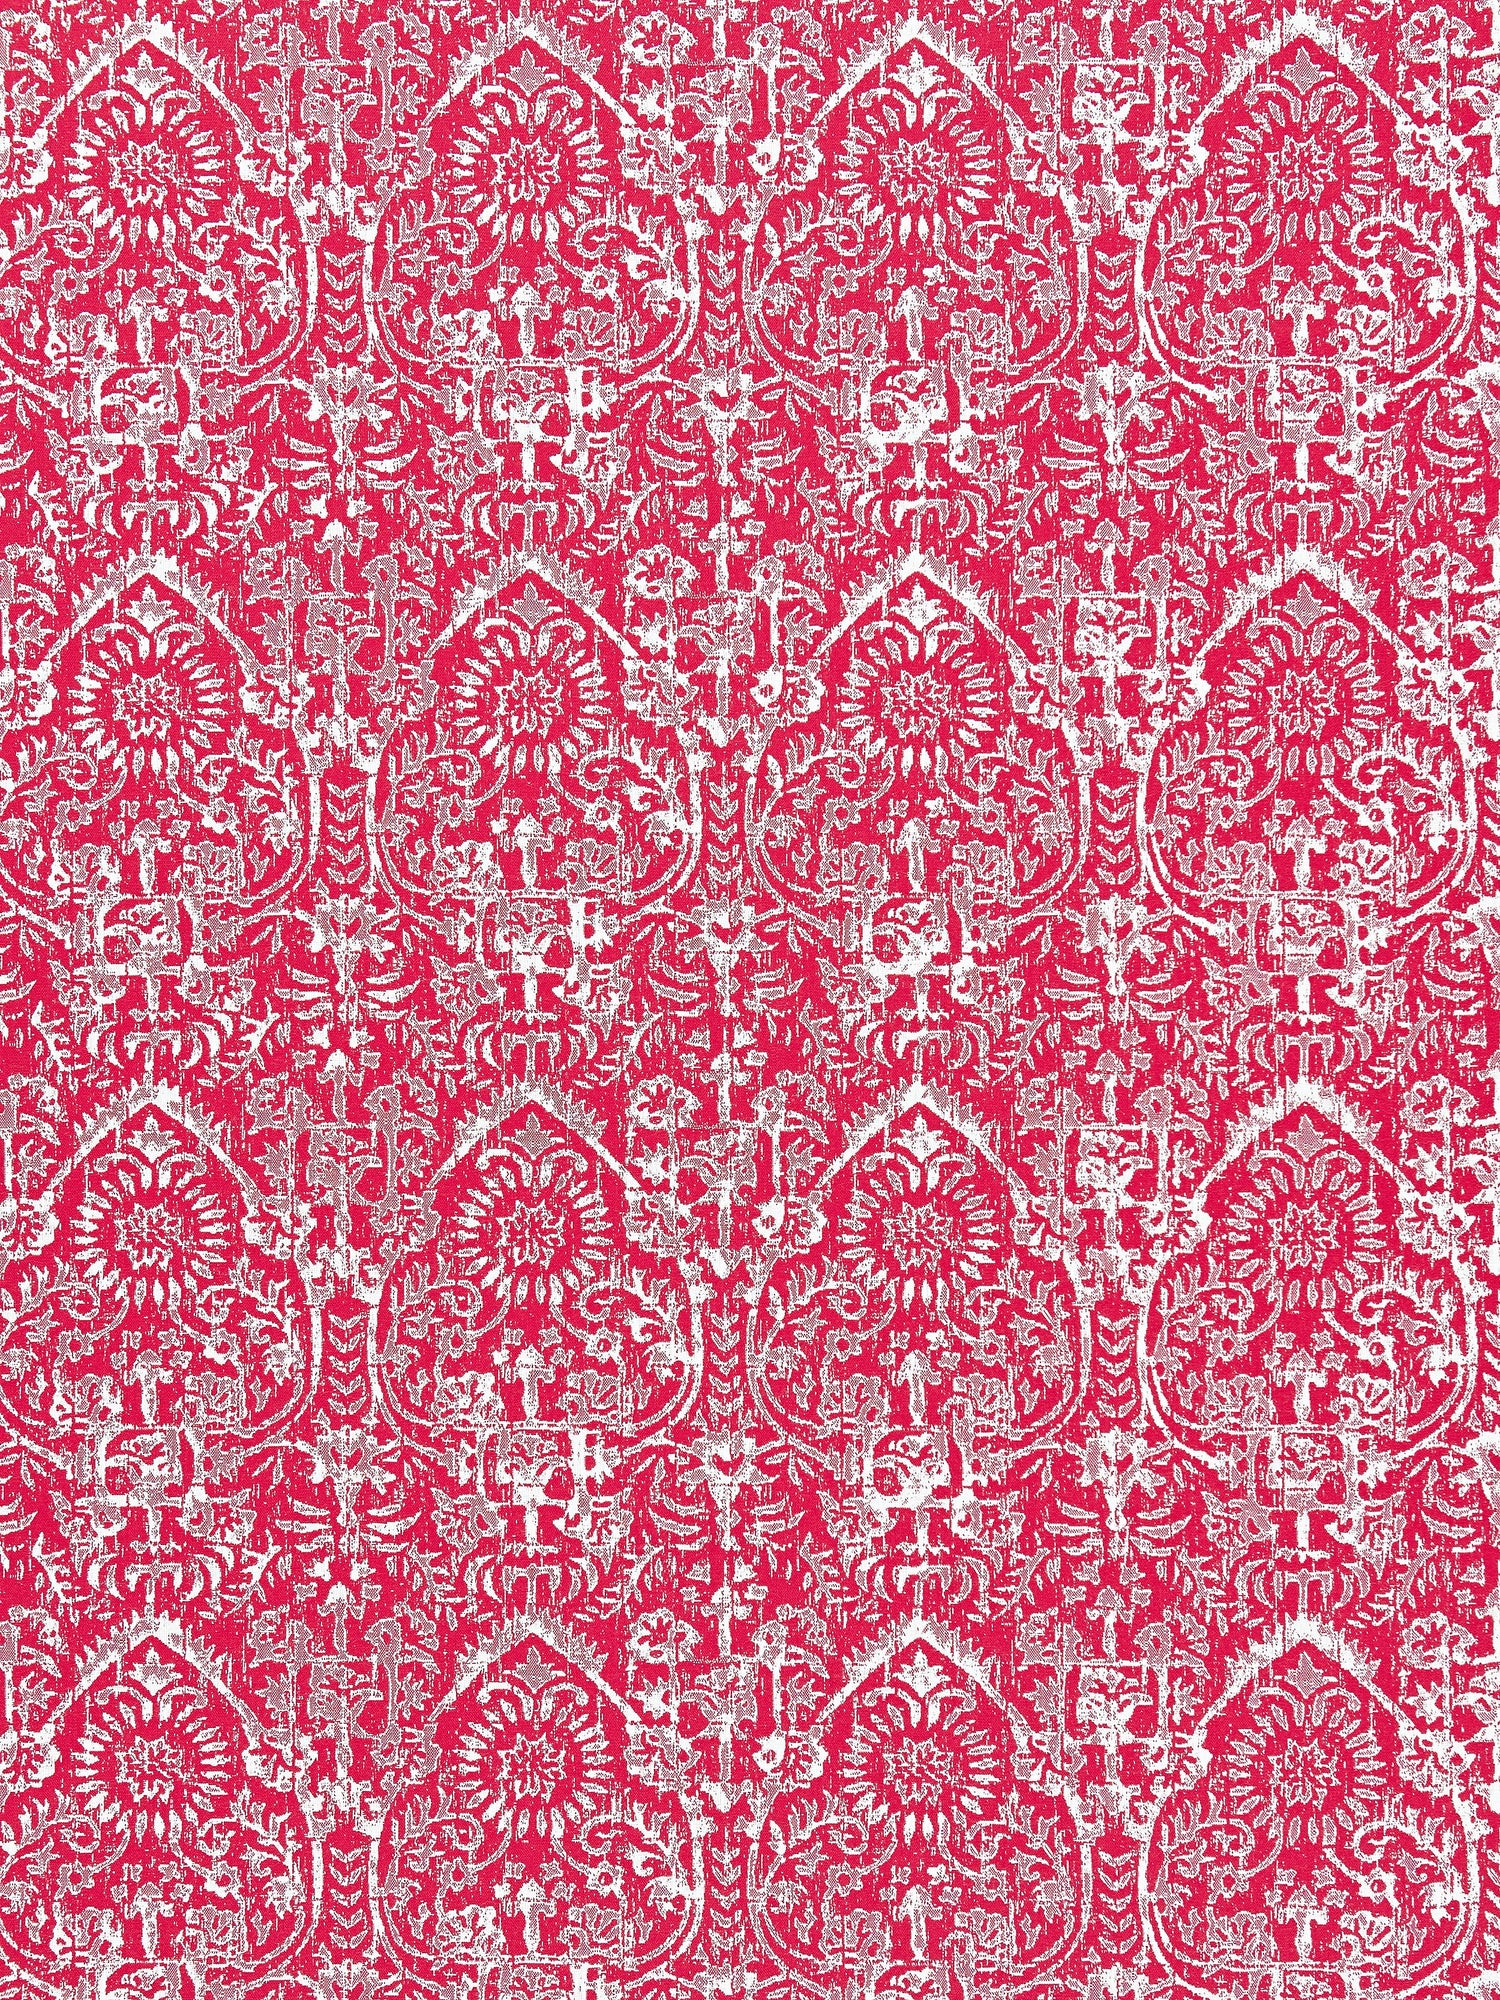 Sarong fabric in hibiscus color - pattern number SC 000327058 - by Scalamandre in the Scalamandre Fabrics Book 1 collection